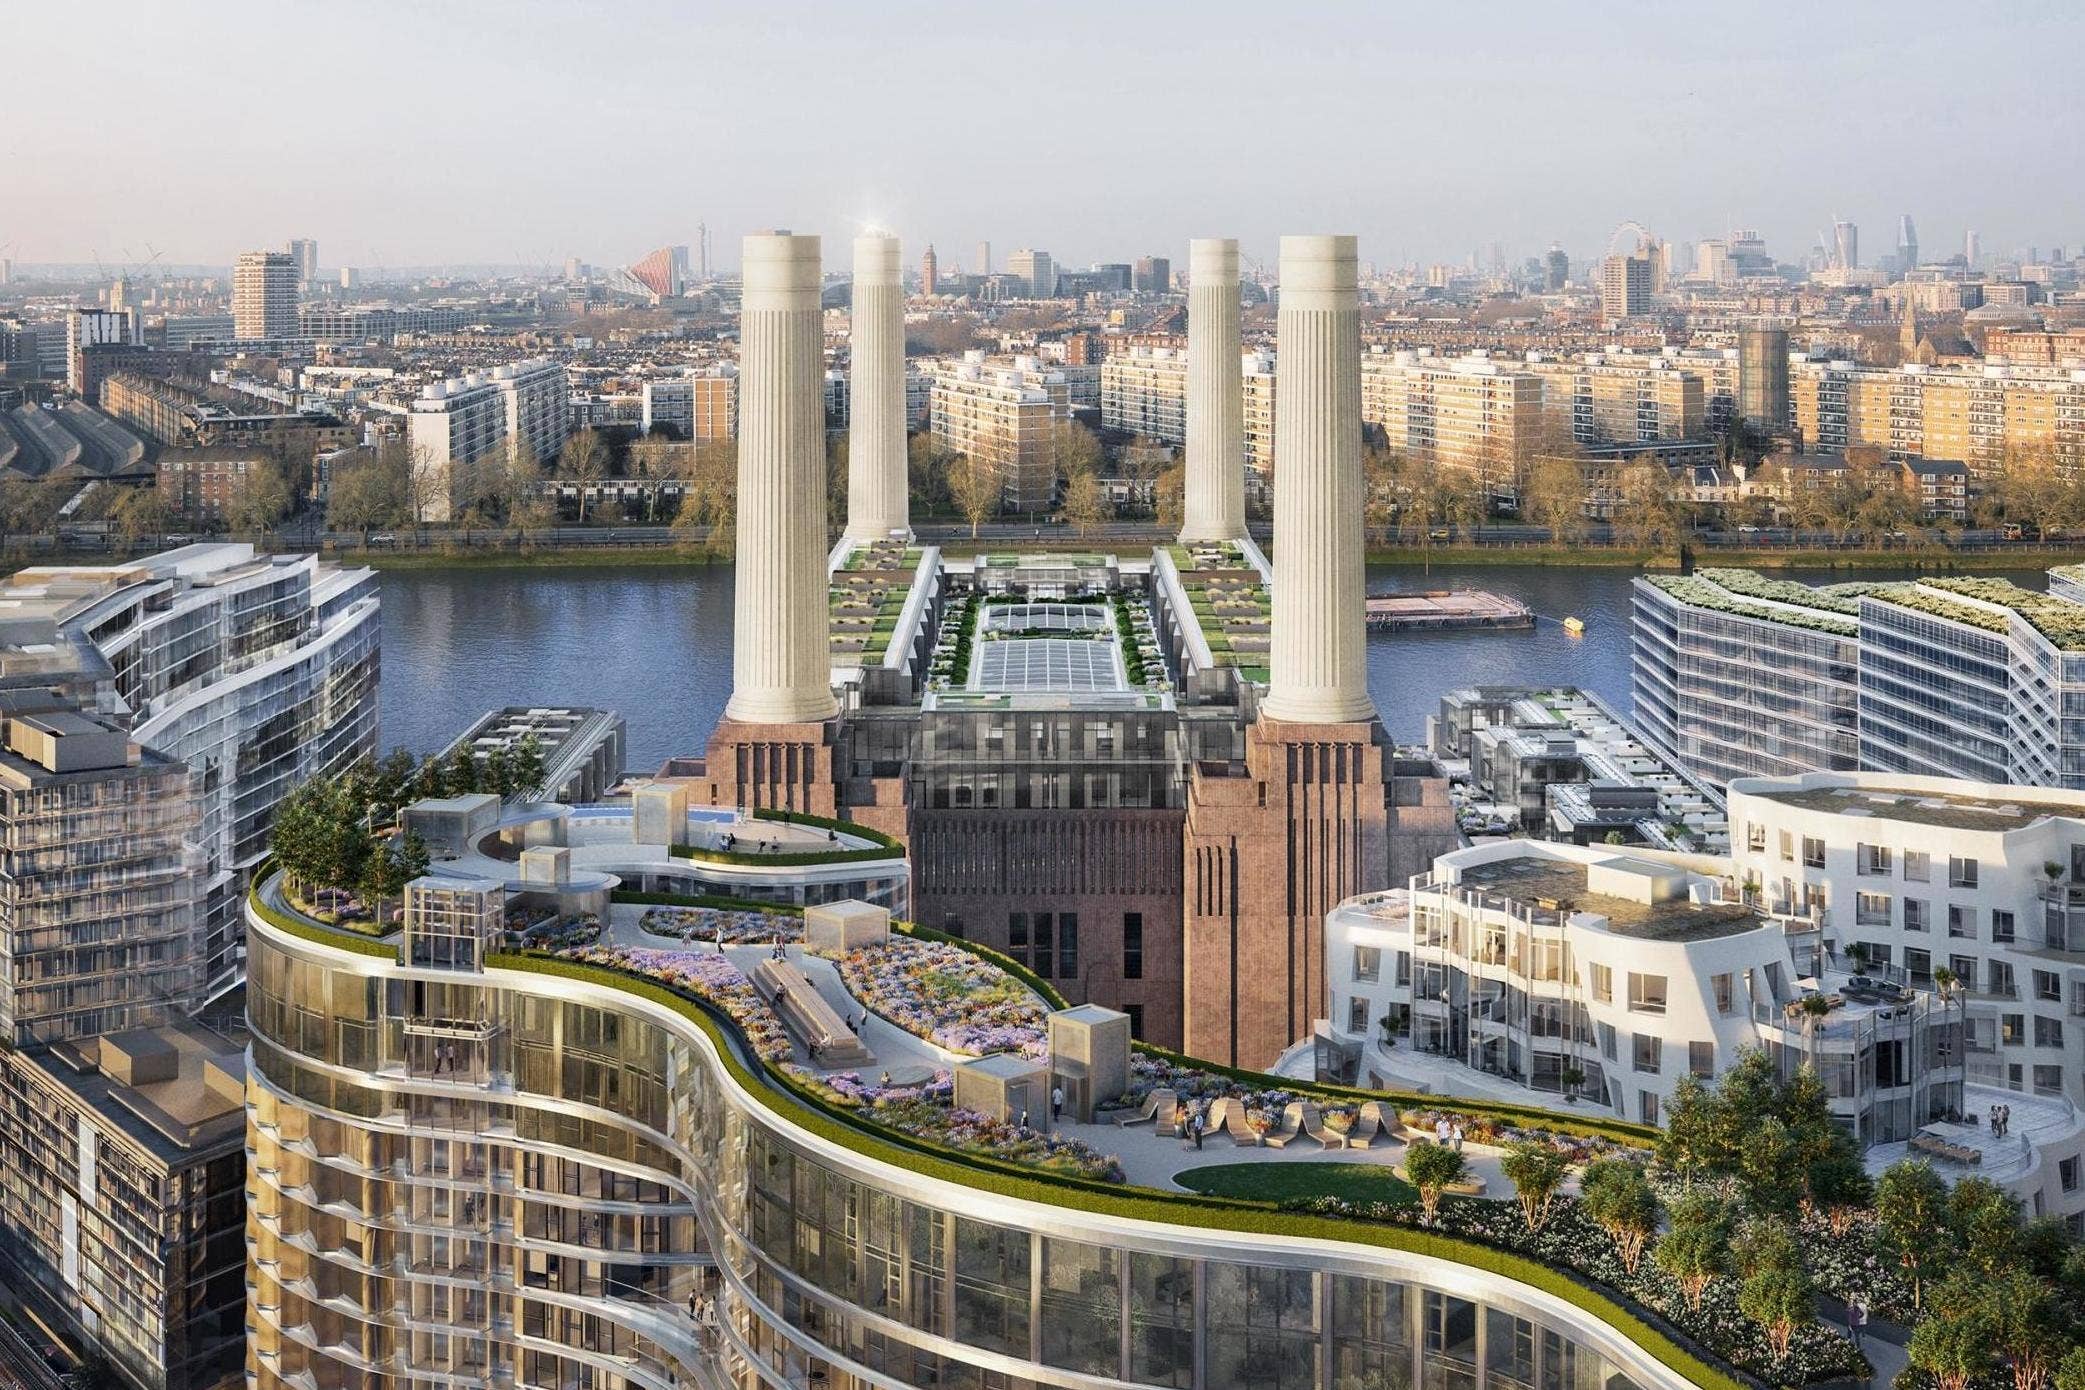 Battersea Power Station and Nine Elms tube stops added to the Northern Line!